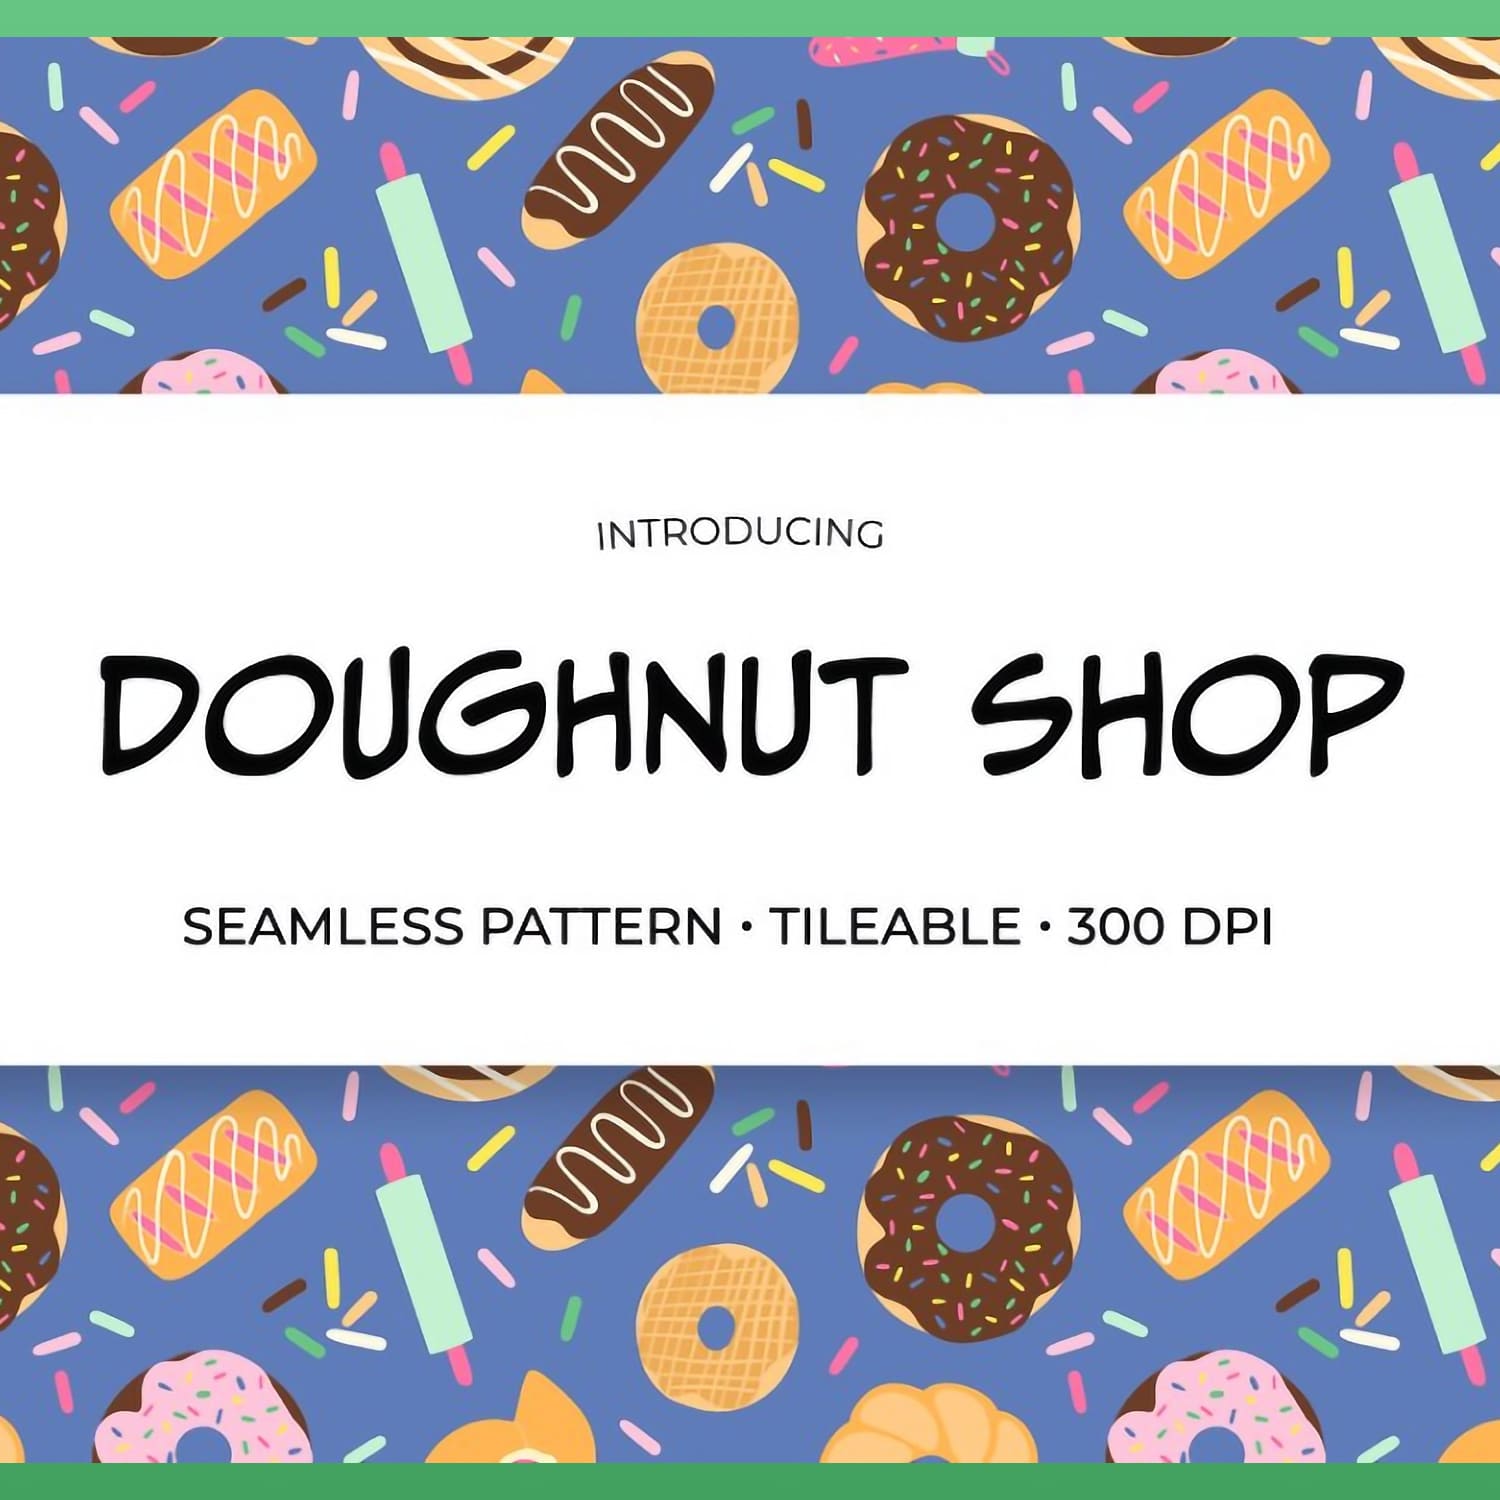 Doughnut Shop Seamless Pattern created by Painted Puffin Creative.